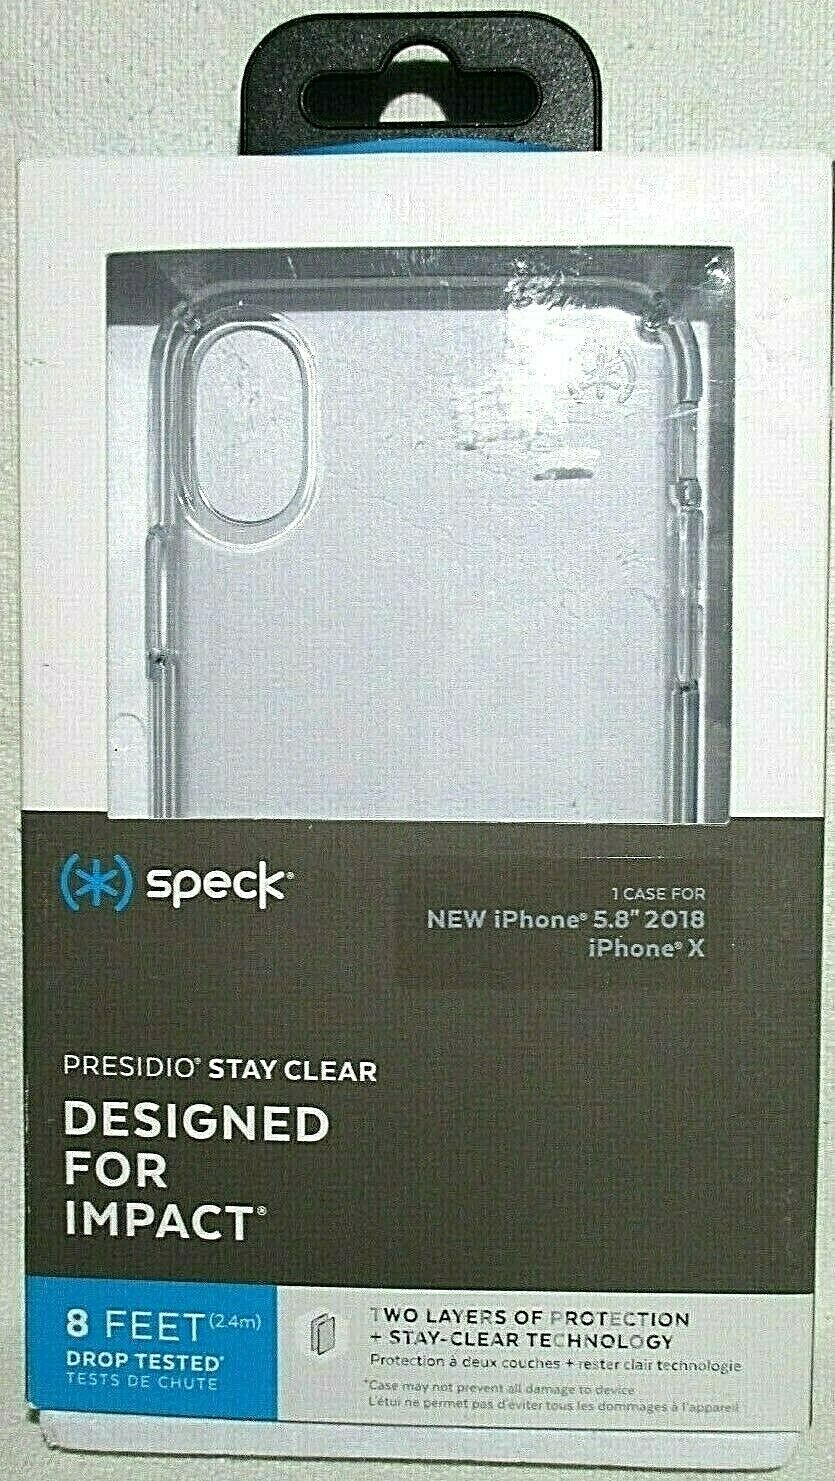 Speck Presido stay clear 8ft drop tested case for iPhone X 2018 5.8